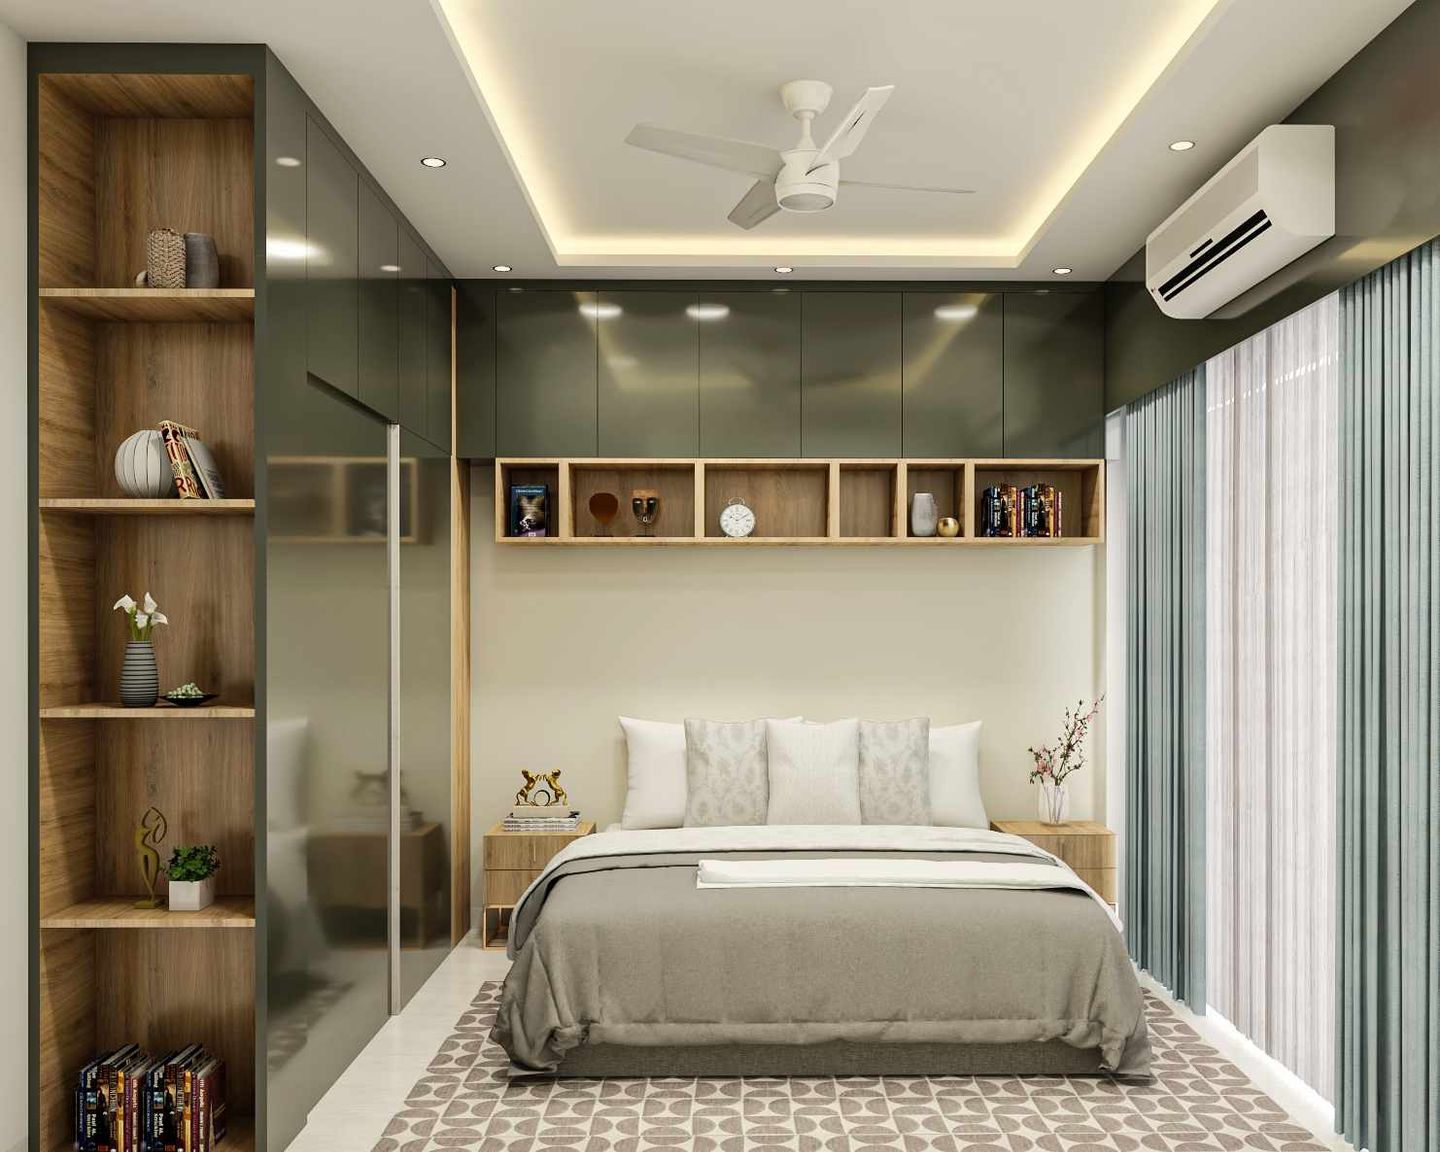 Master Bedroom Design With Full-Wall Wardrobe And Overhead Storage - Livspace